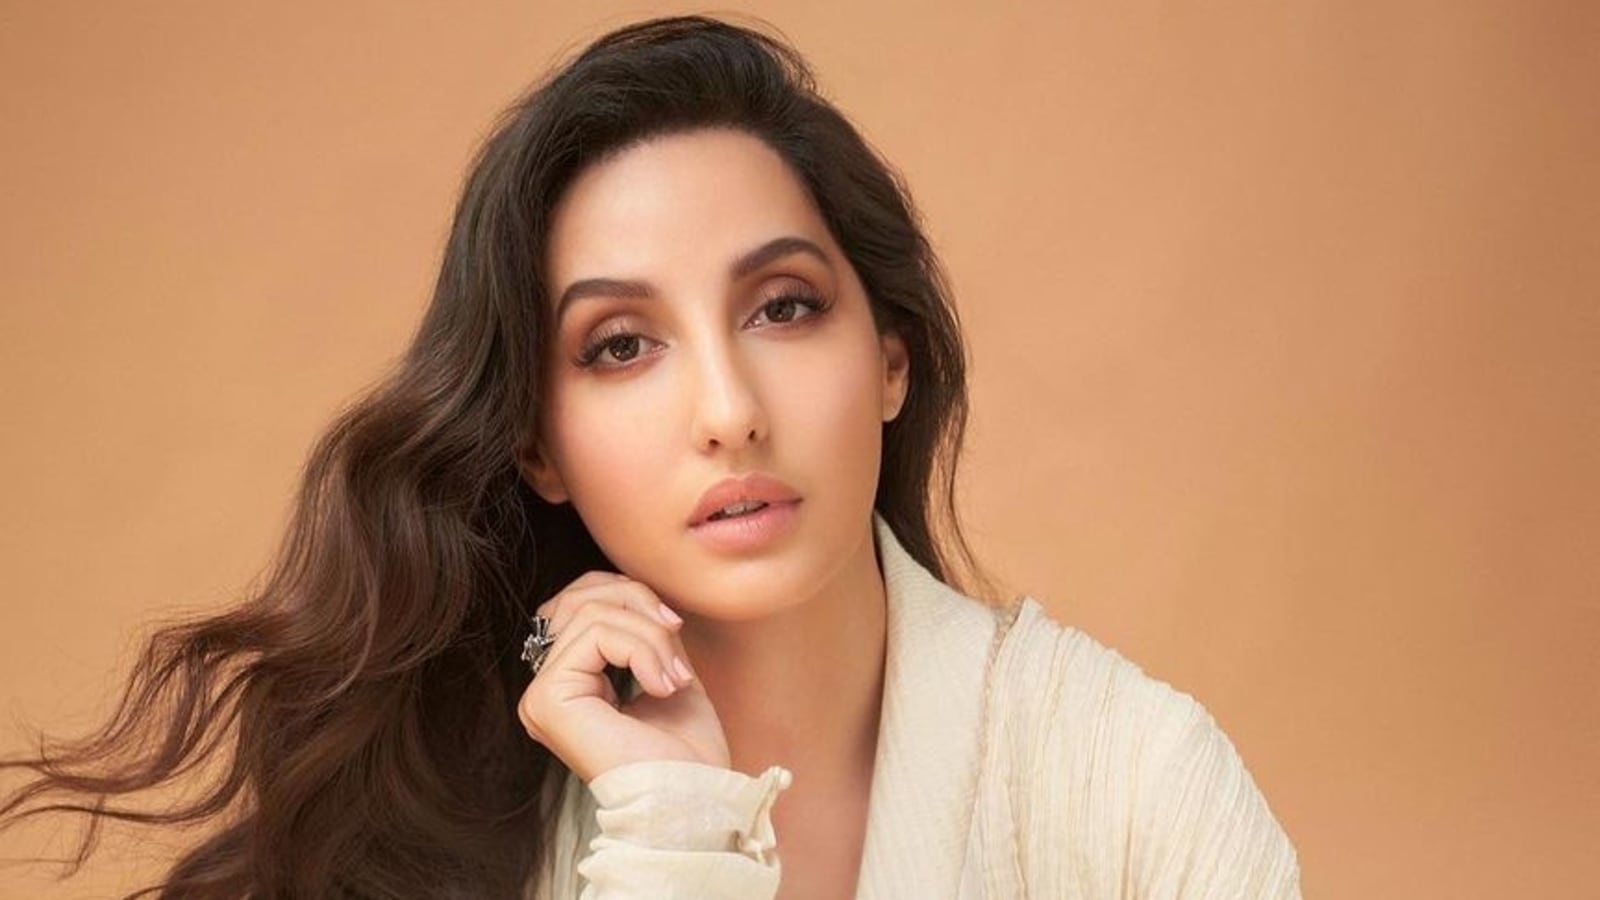 Nora Fatehi recalls working as waitress in her teenage years, calls the job 'very difficult' | Bollywood - Hindustan Times